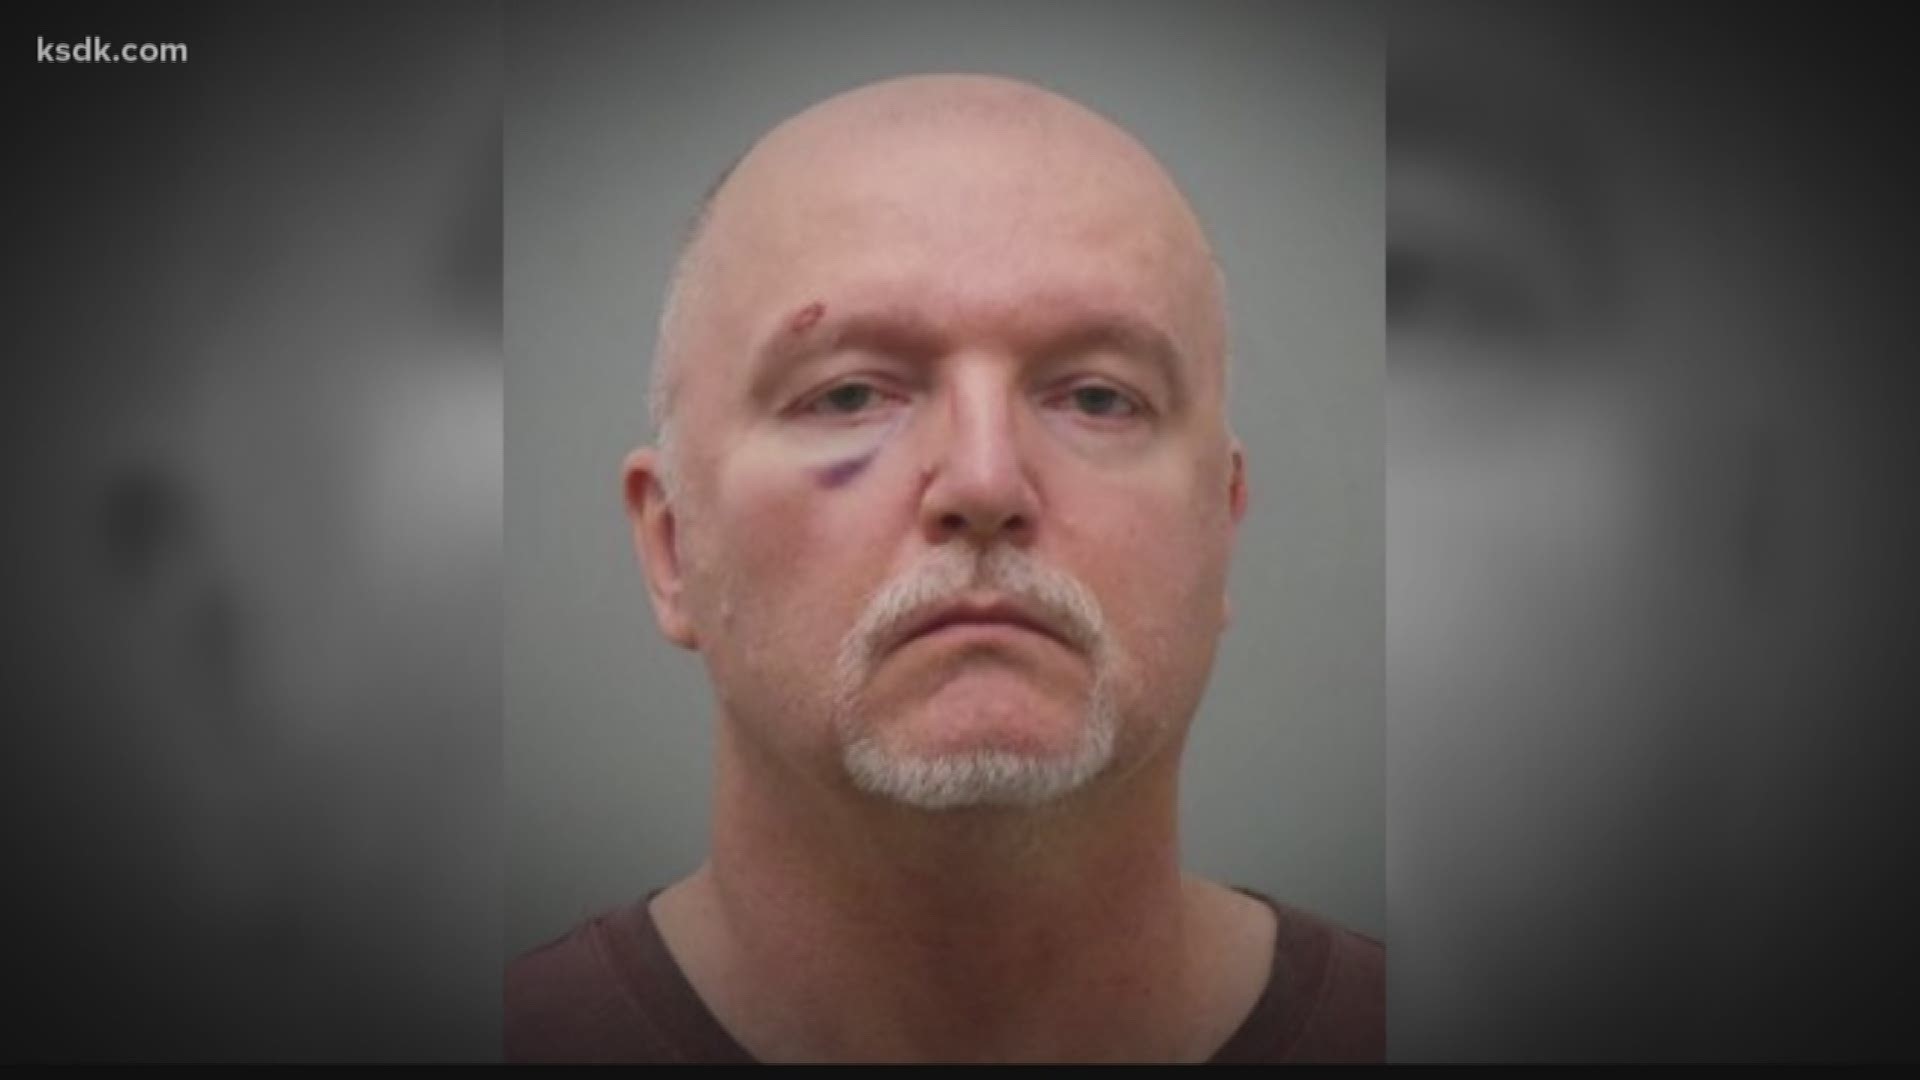 Monday afternoon, the Jefferson County Prosecuting Attorney’s Office announced Thomas J. Bruce, 53, was charged with burglary, kidnapping, sexual abuse, harassment and assault.